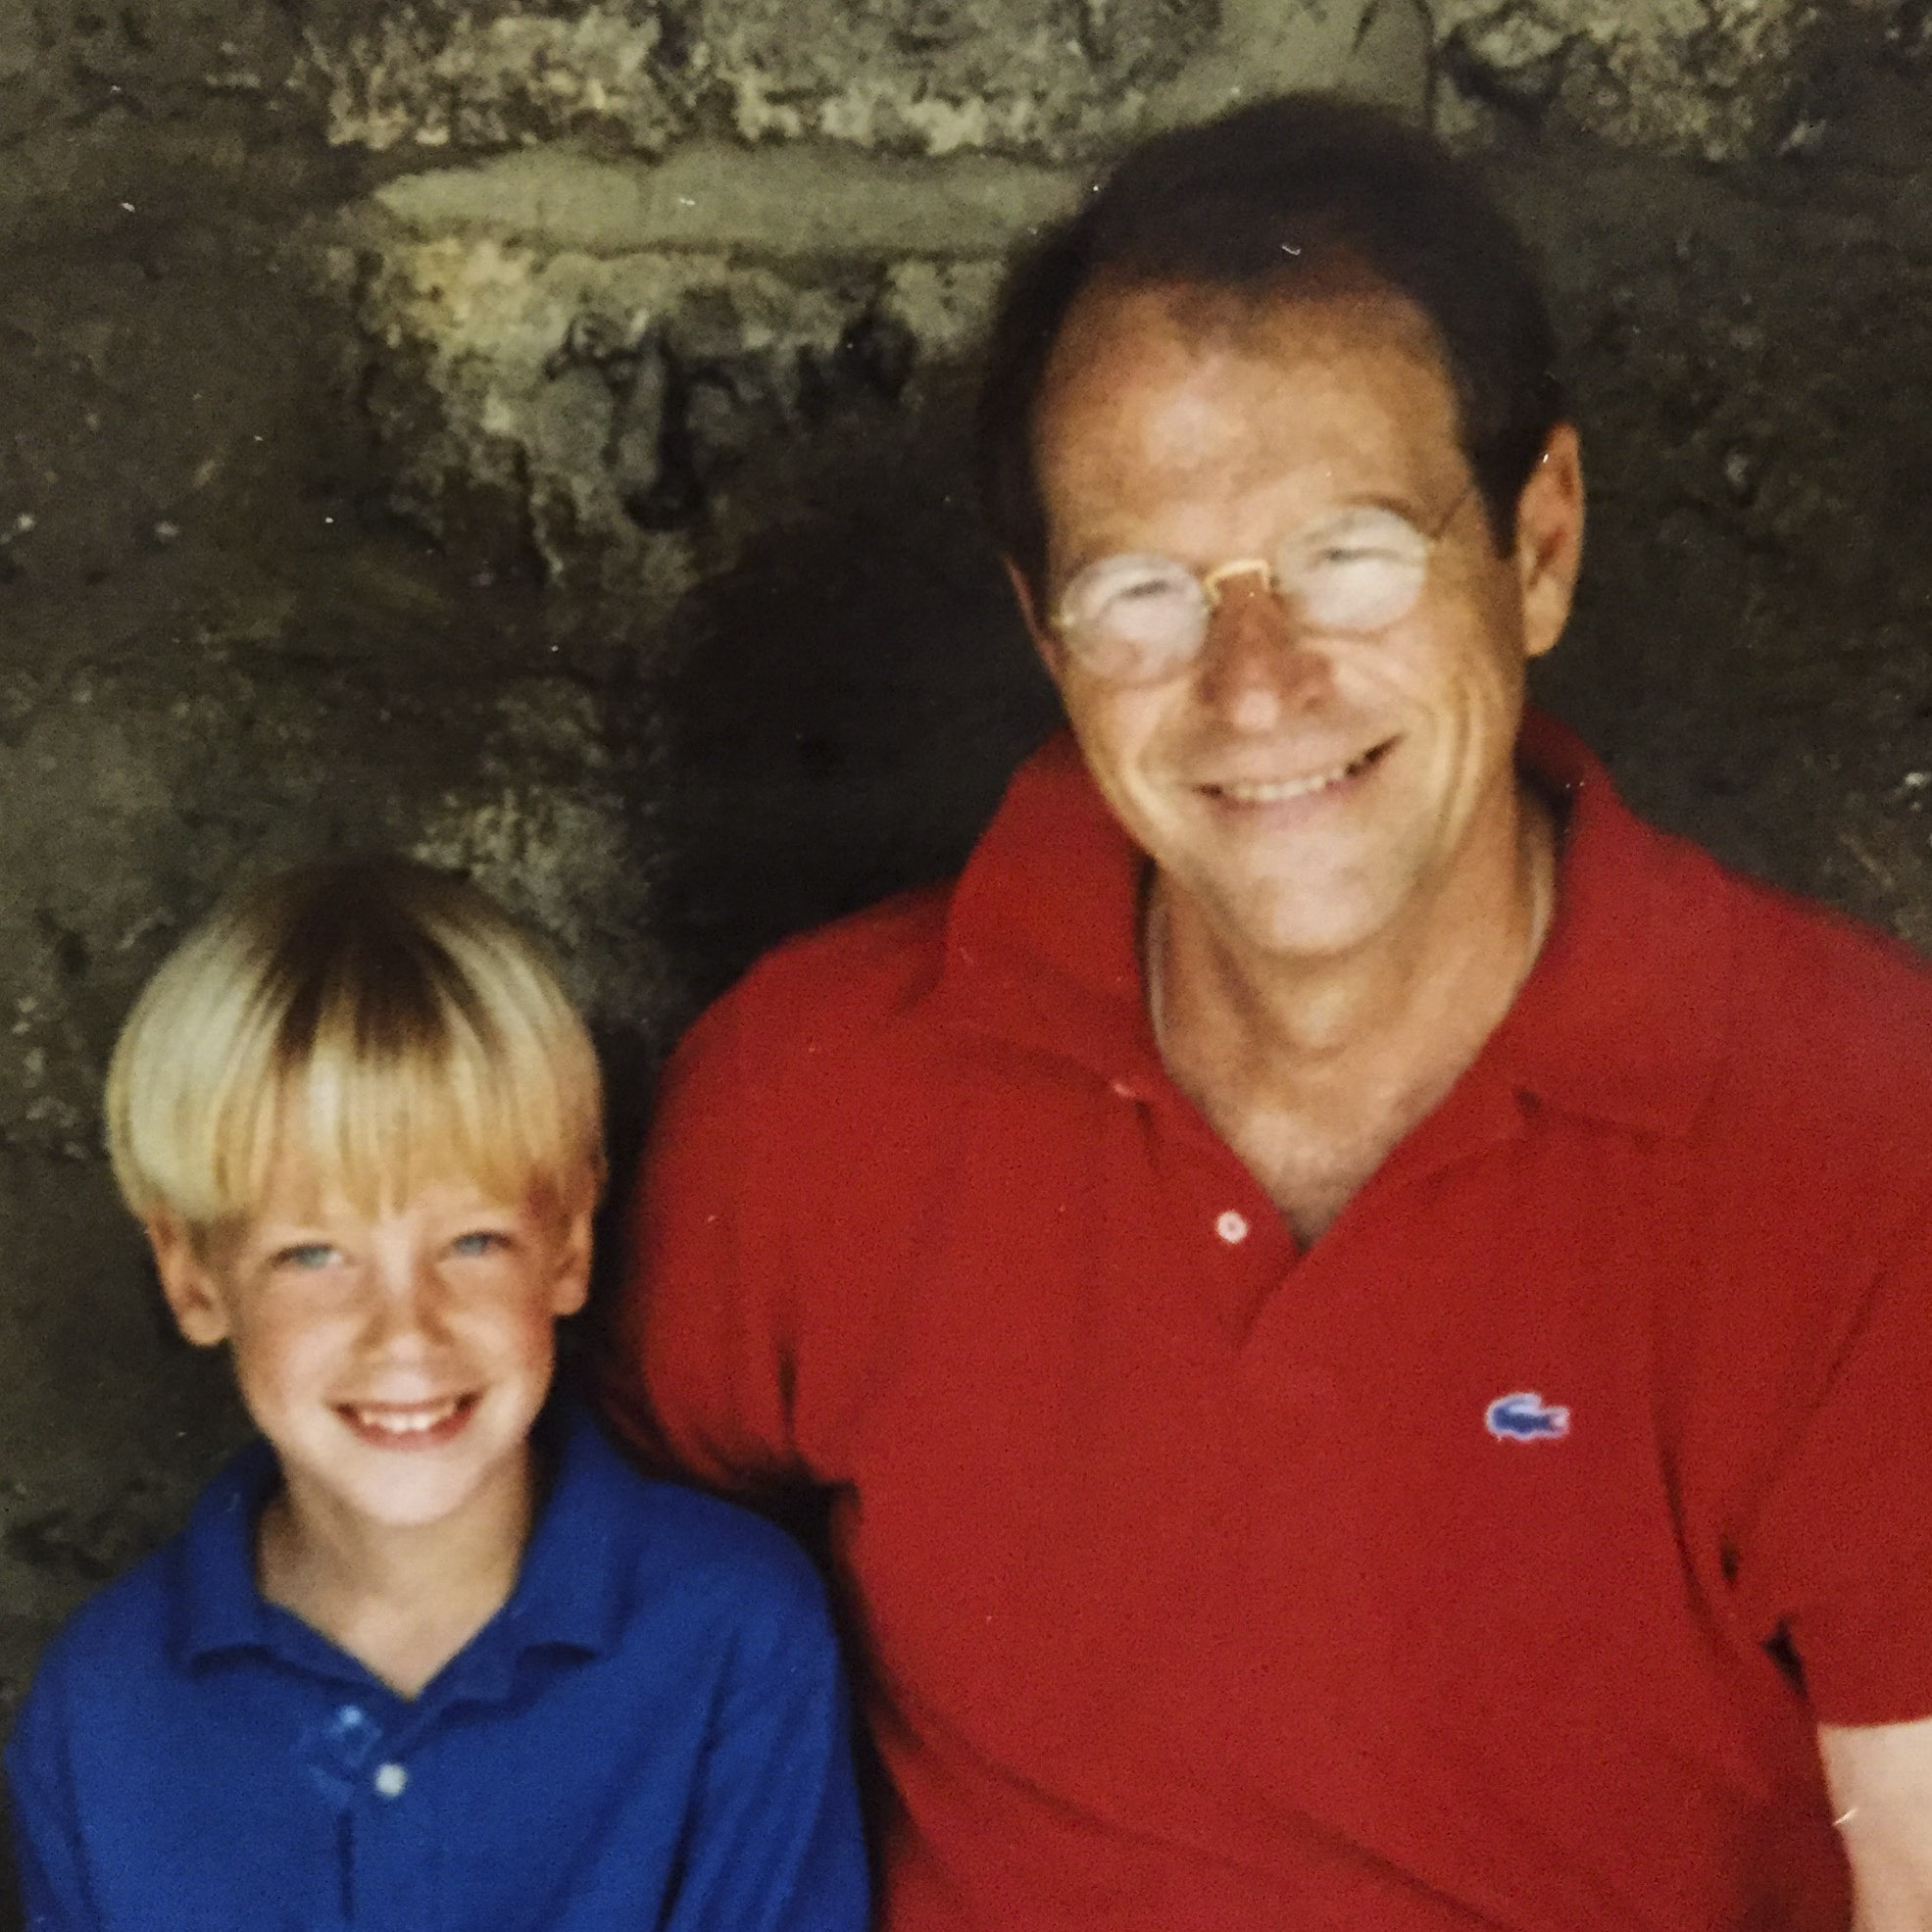 Brad Gunter, right, and his son, left, in a cave